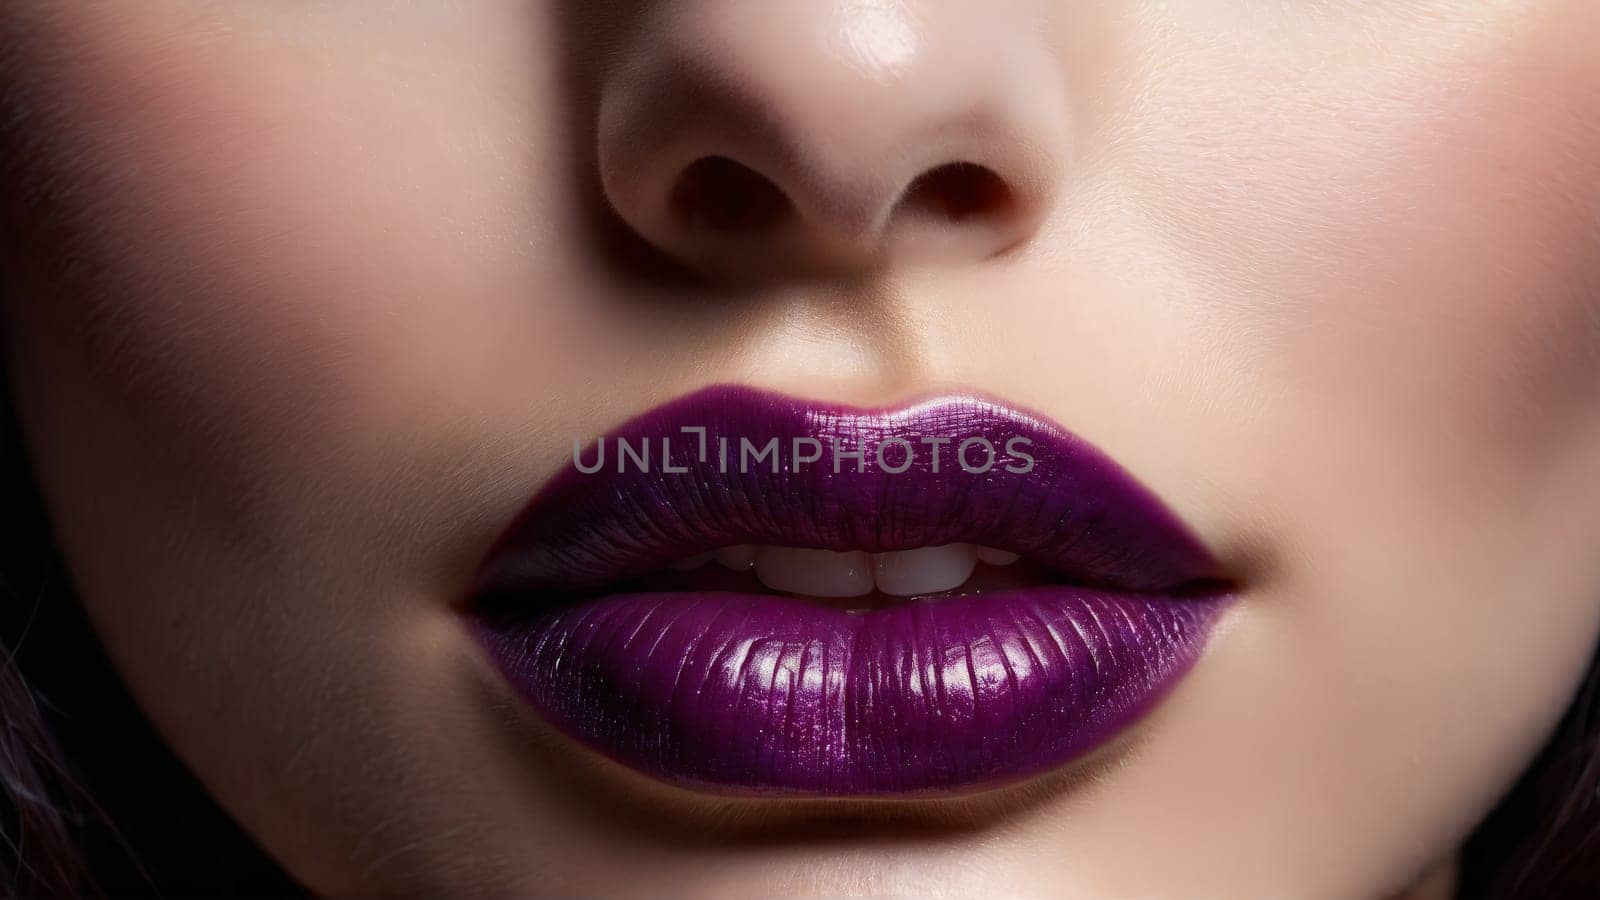 Plum Lips A stunning woman with porcelain skin dark hair and lips the color of by panophotograph